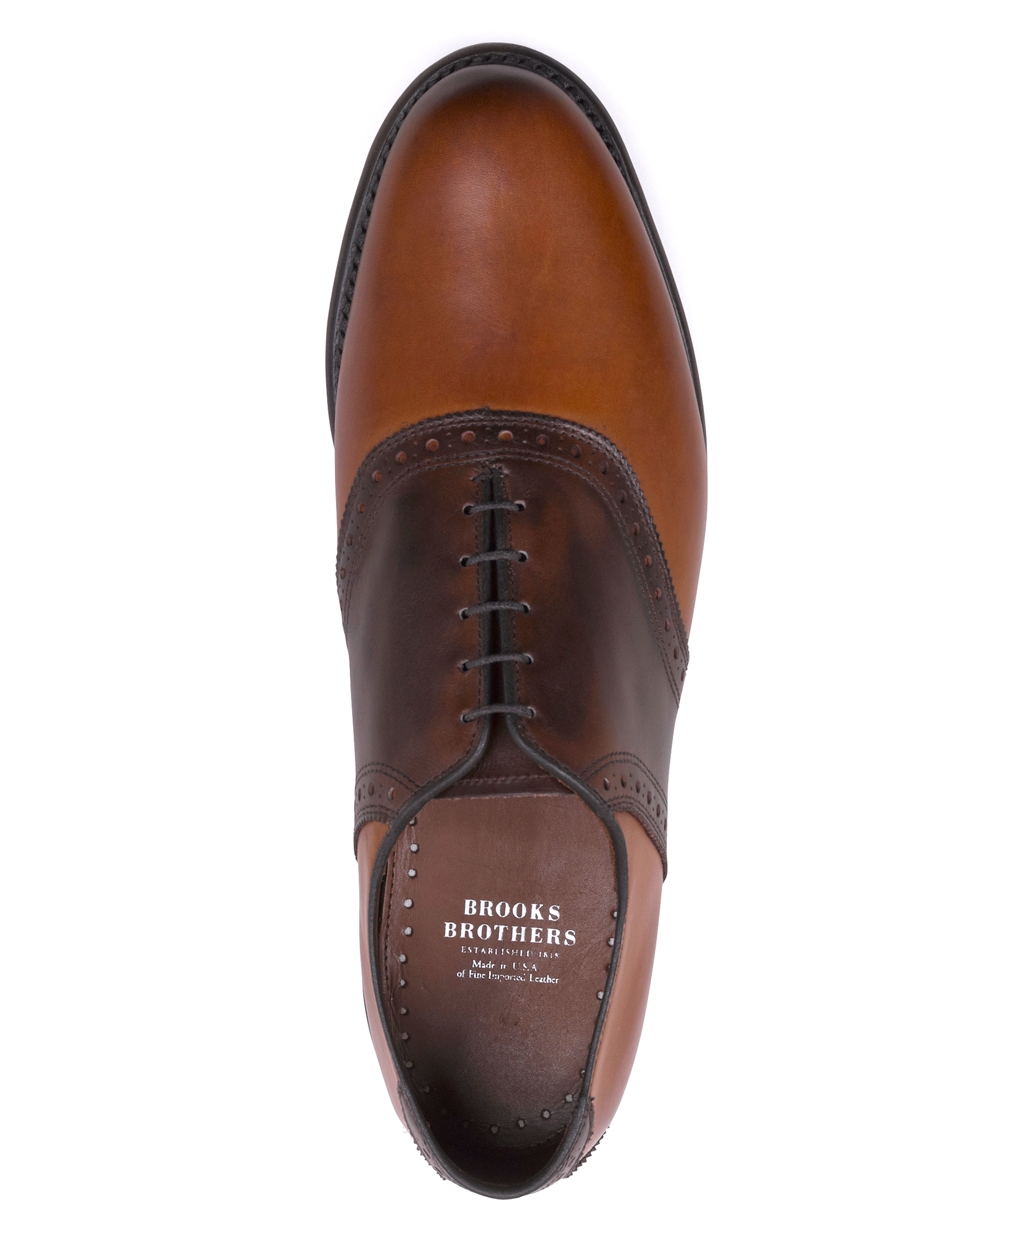 Lyst - Brooks Brothers Leather Saddle Shoes in Brown for Men